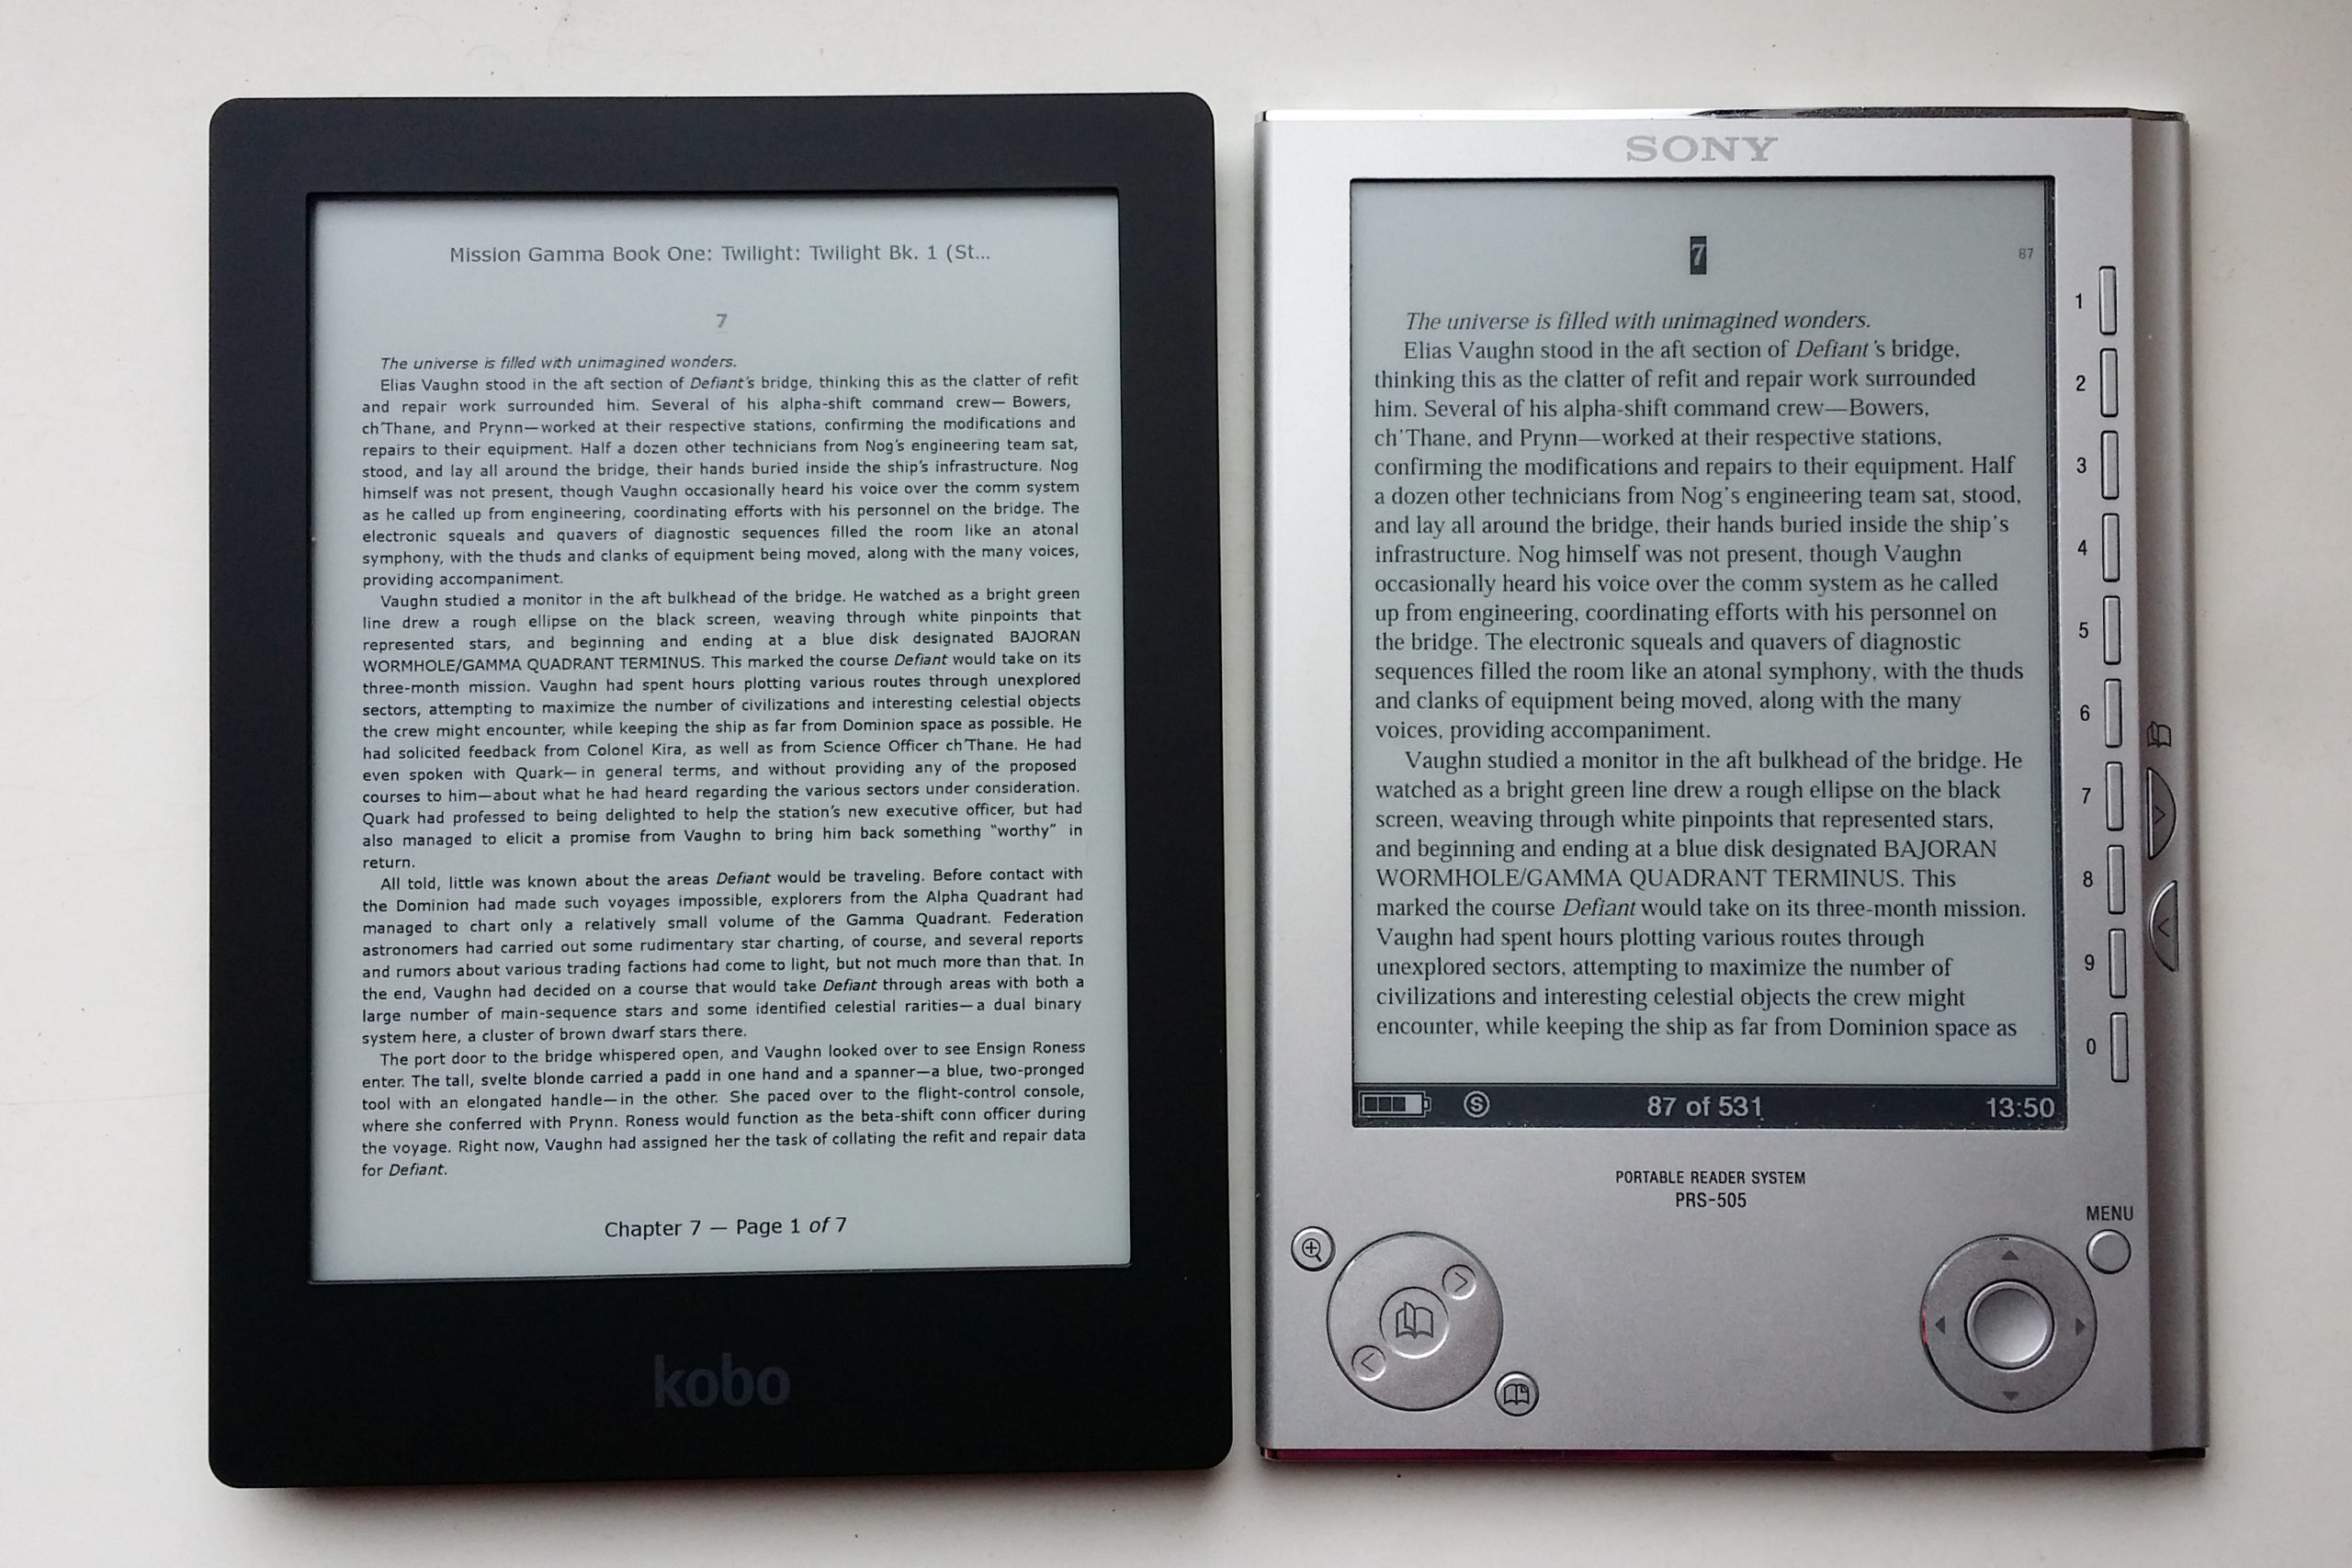 Review: Kobo Aura HD (comparison with Sony PRS-505)